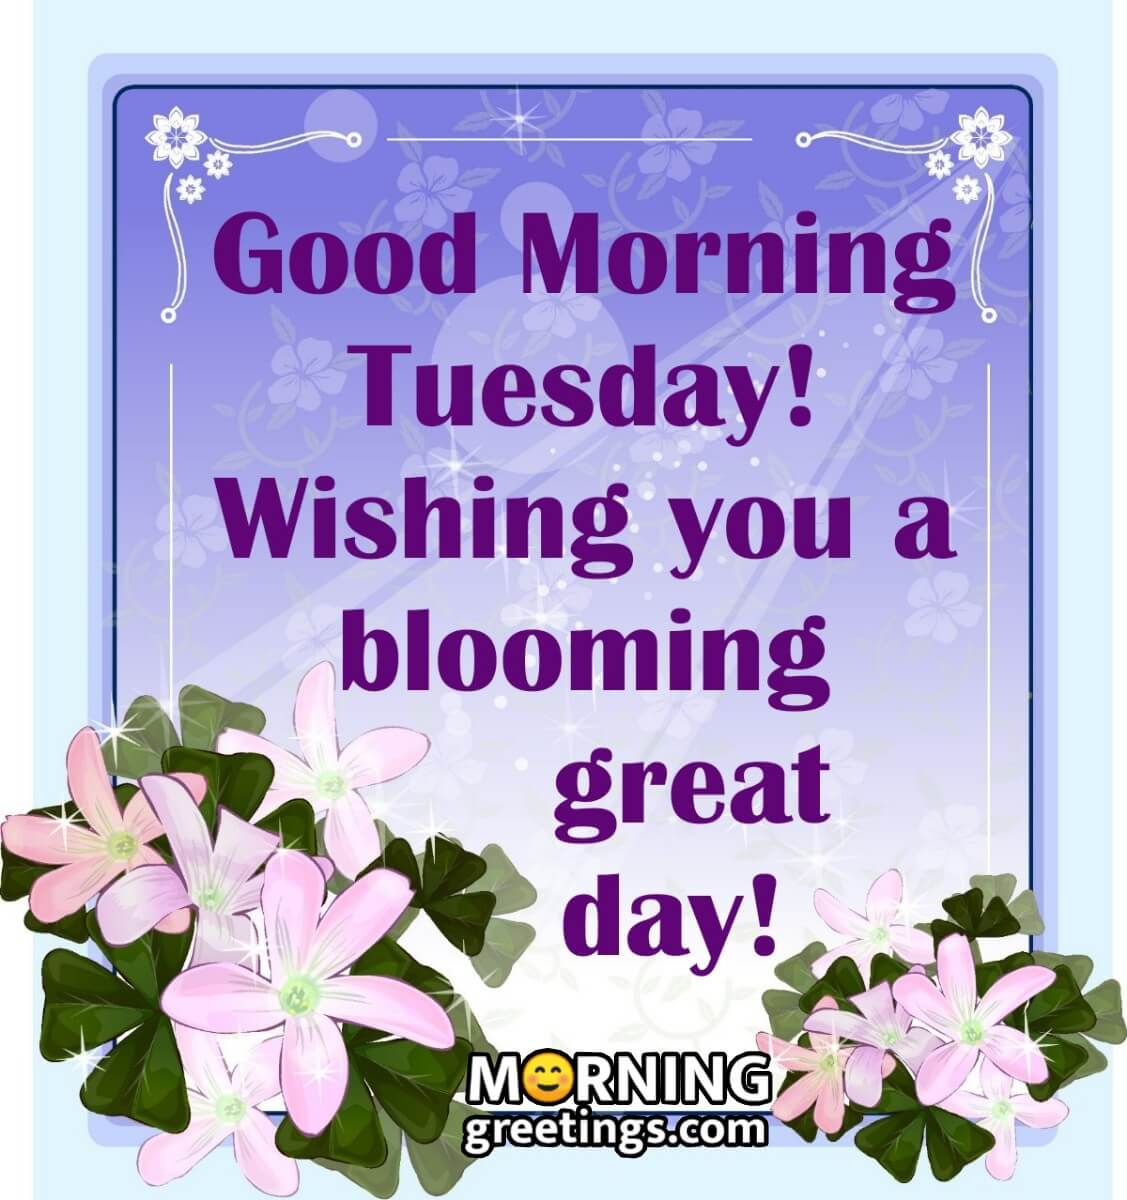 Good Morning Tuesday! Wishing You A Blooming Great Day!